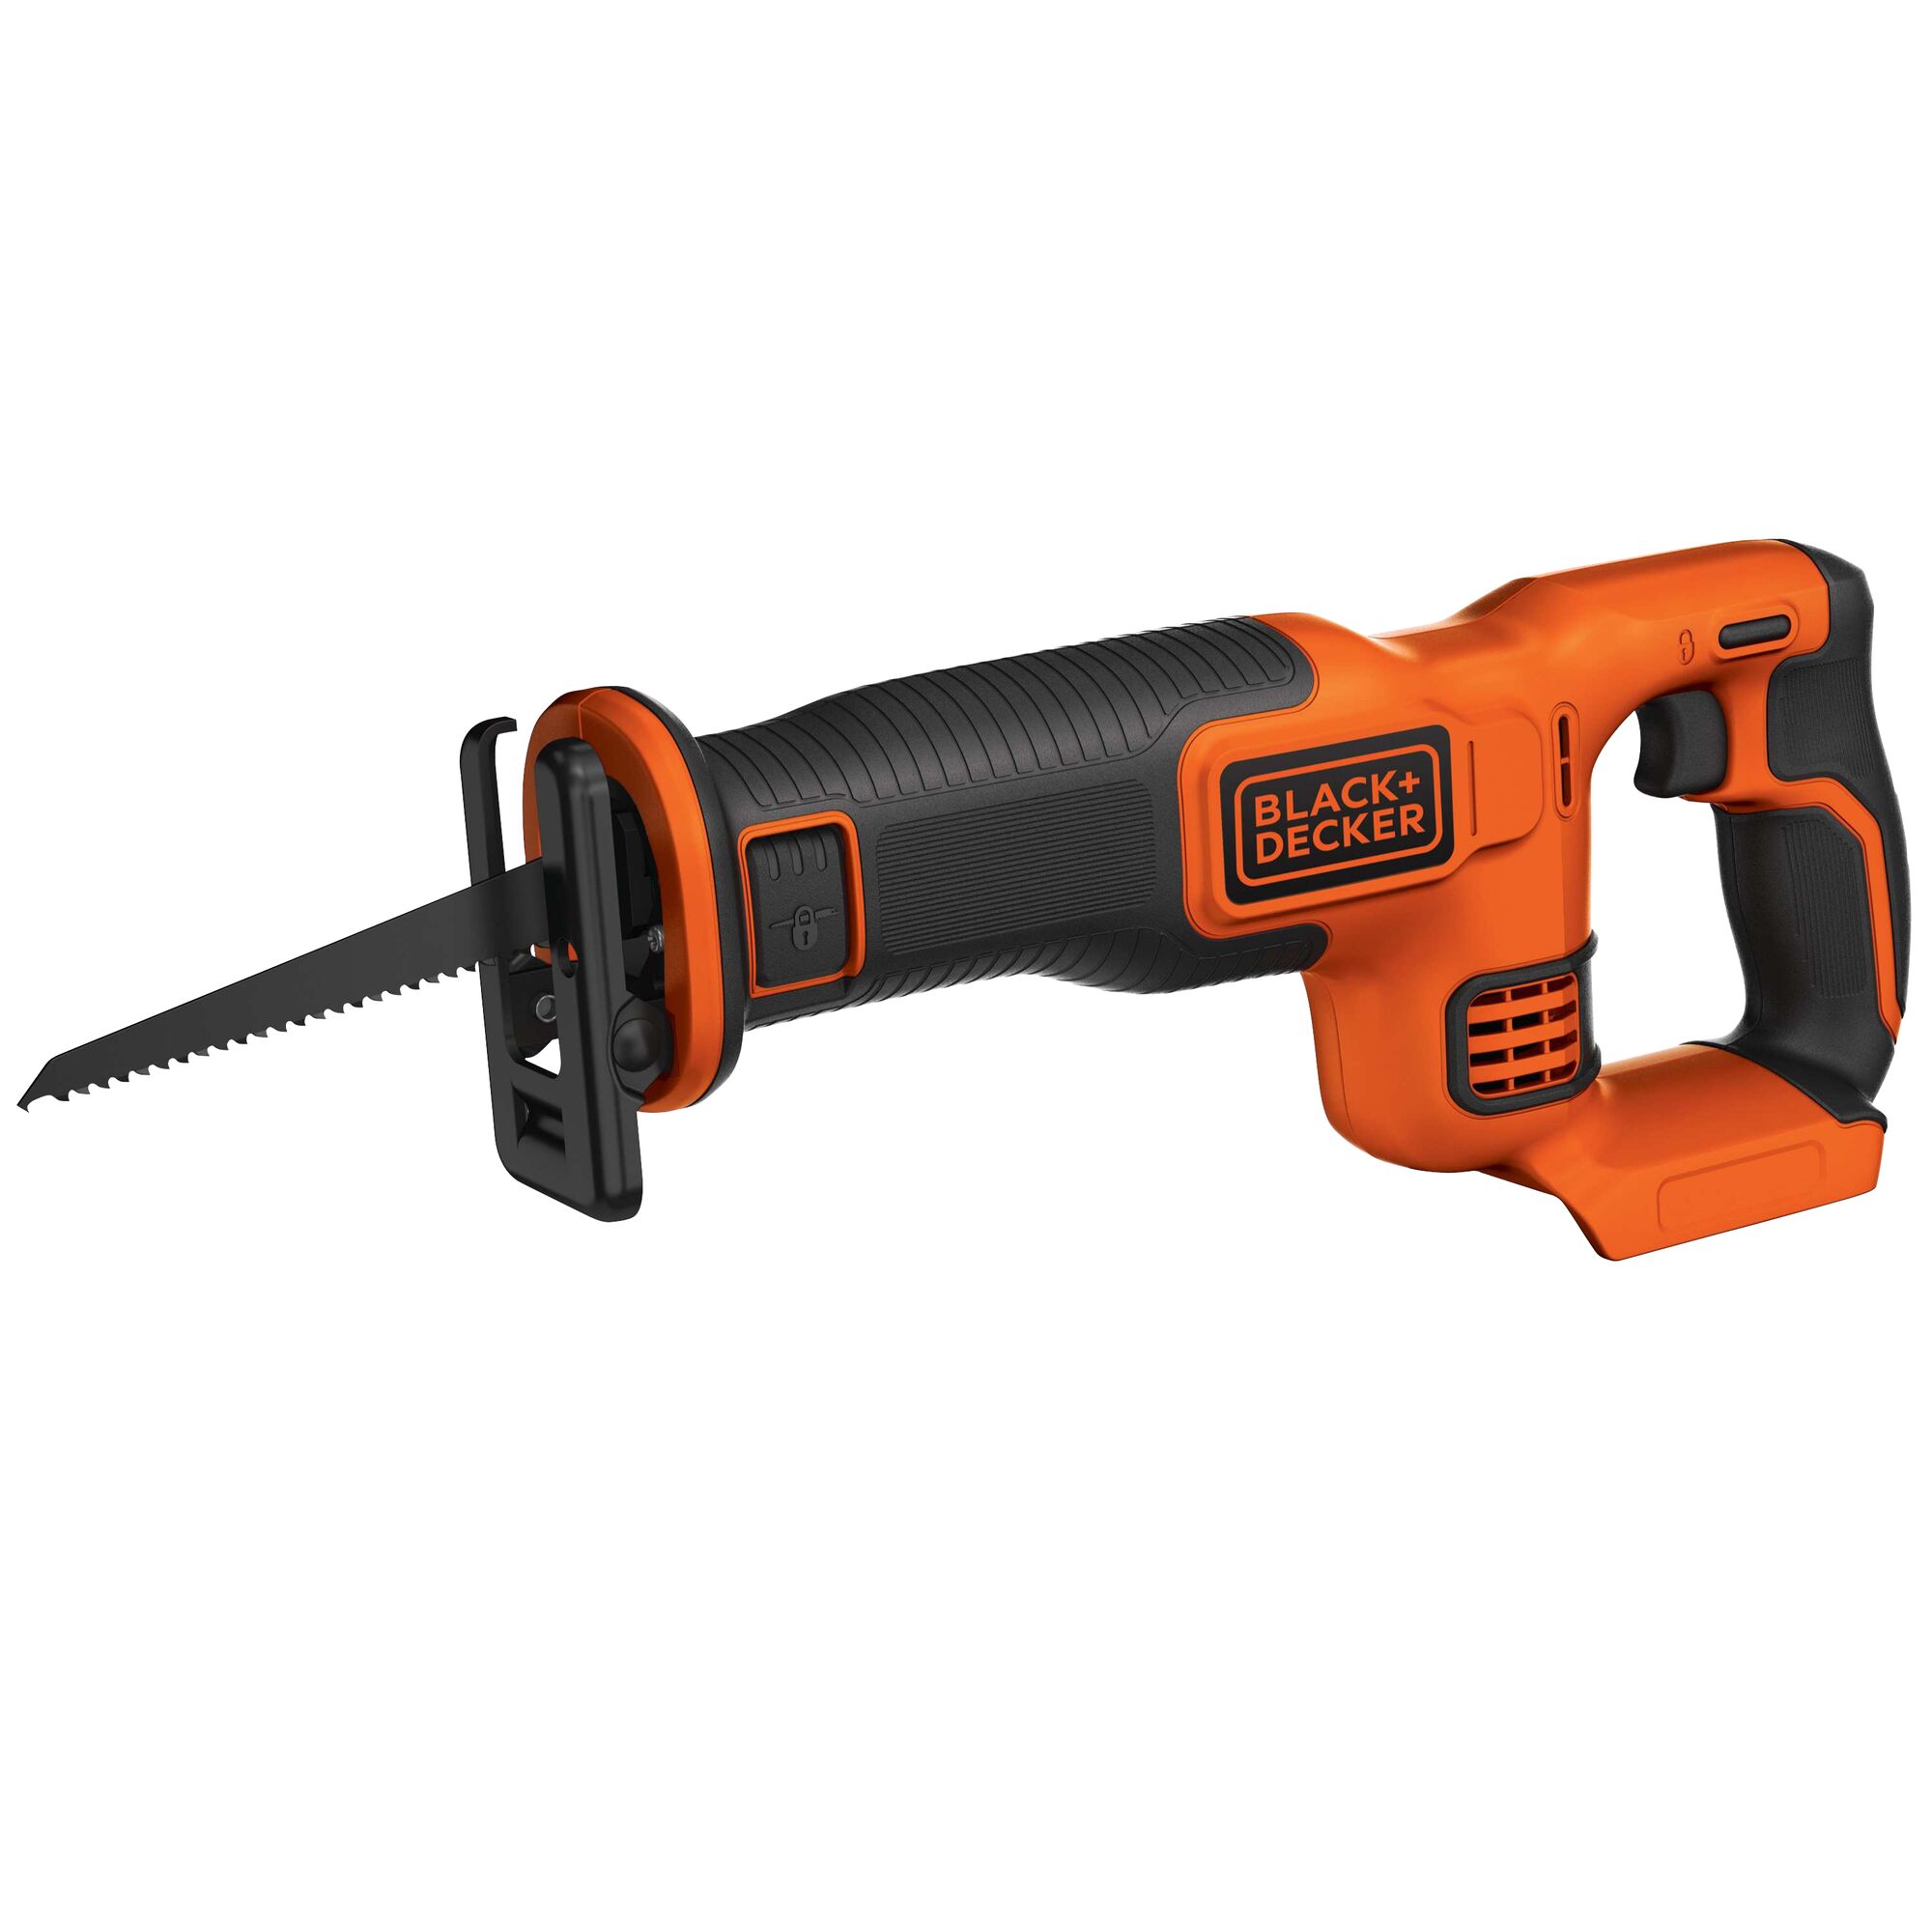 Profile of 20 volt max lithium reciprocating saw battery and charger not included.